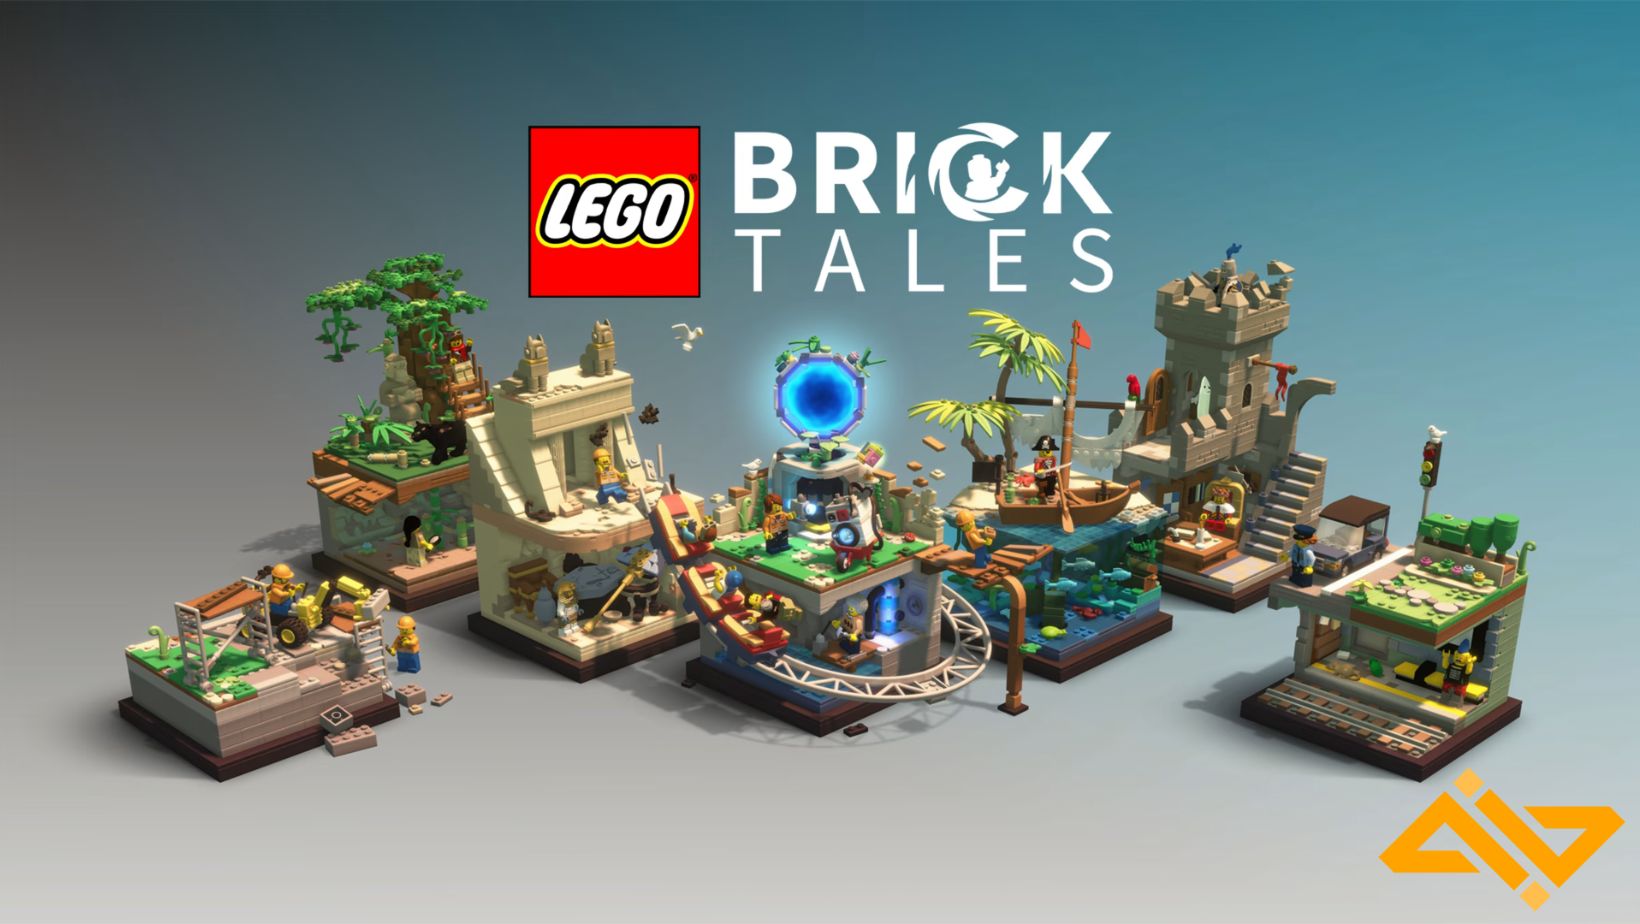 Embark on an epic adventure across a world of beautiful Lego biomes crafted brick by brick.